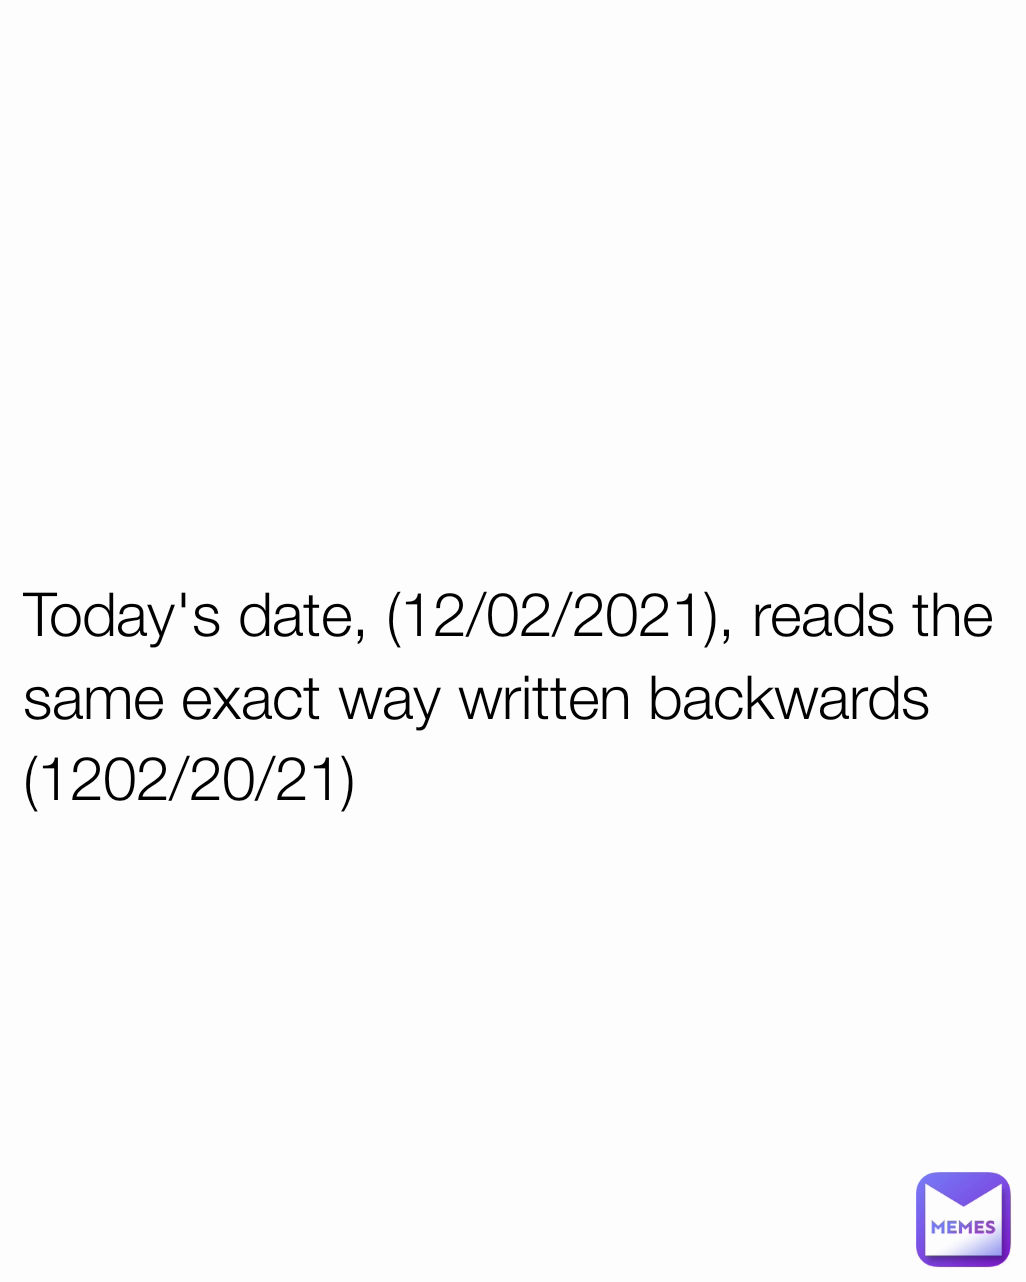 Today's date, (12/02/2021), reads the same exact way written backwards (1202/20/21)